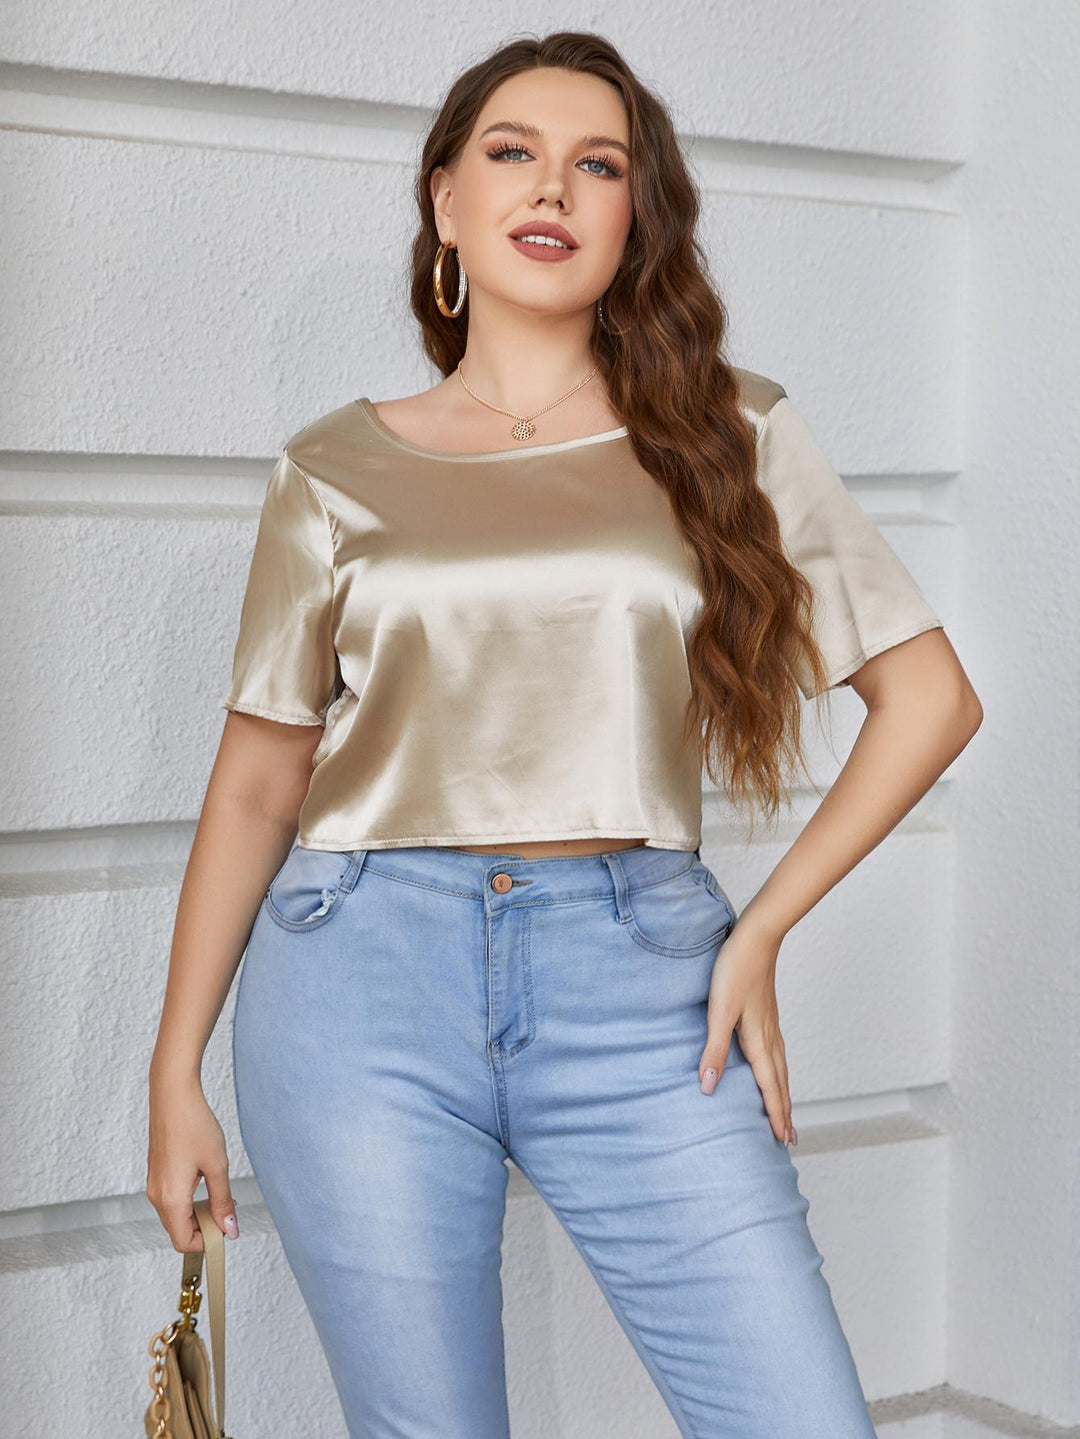 Women's Summer Short-sleeved Solid Color Backless Top T-shirt